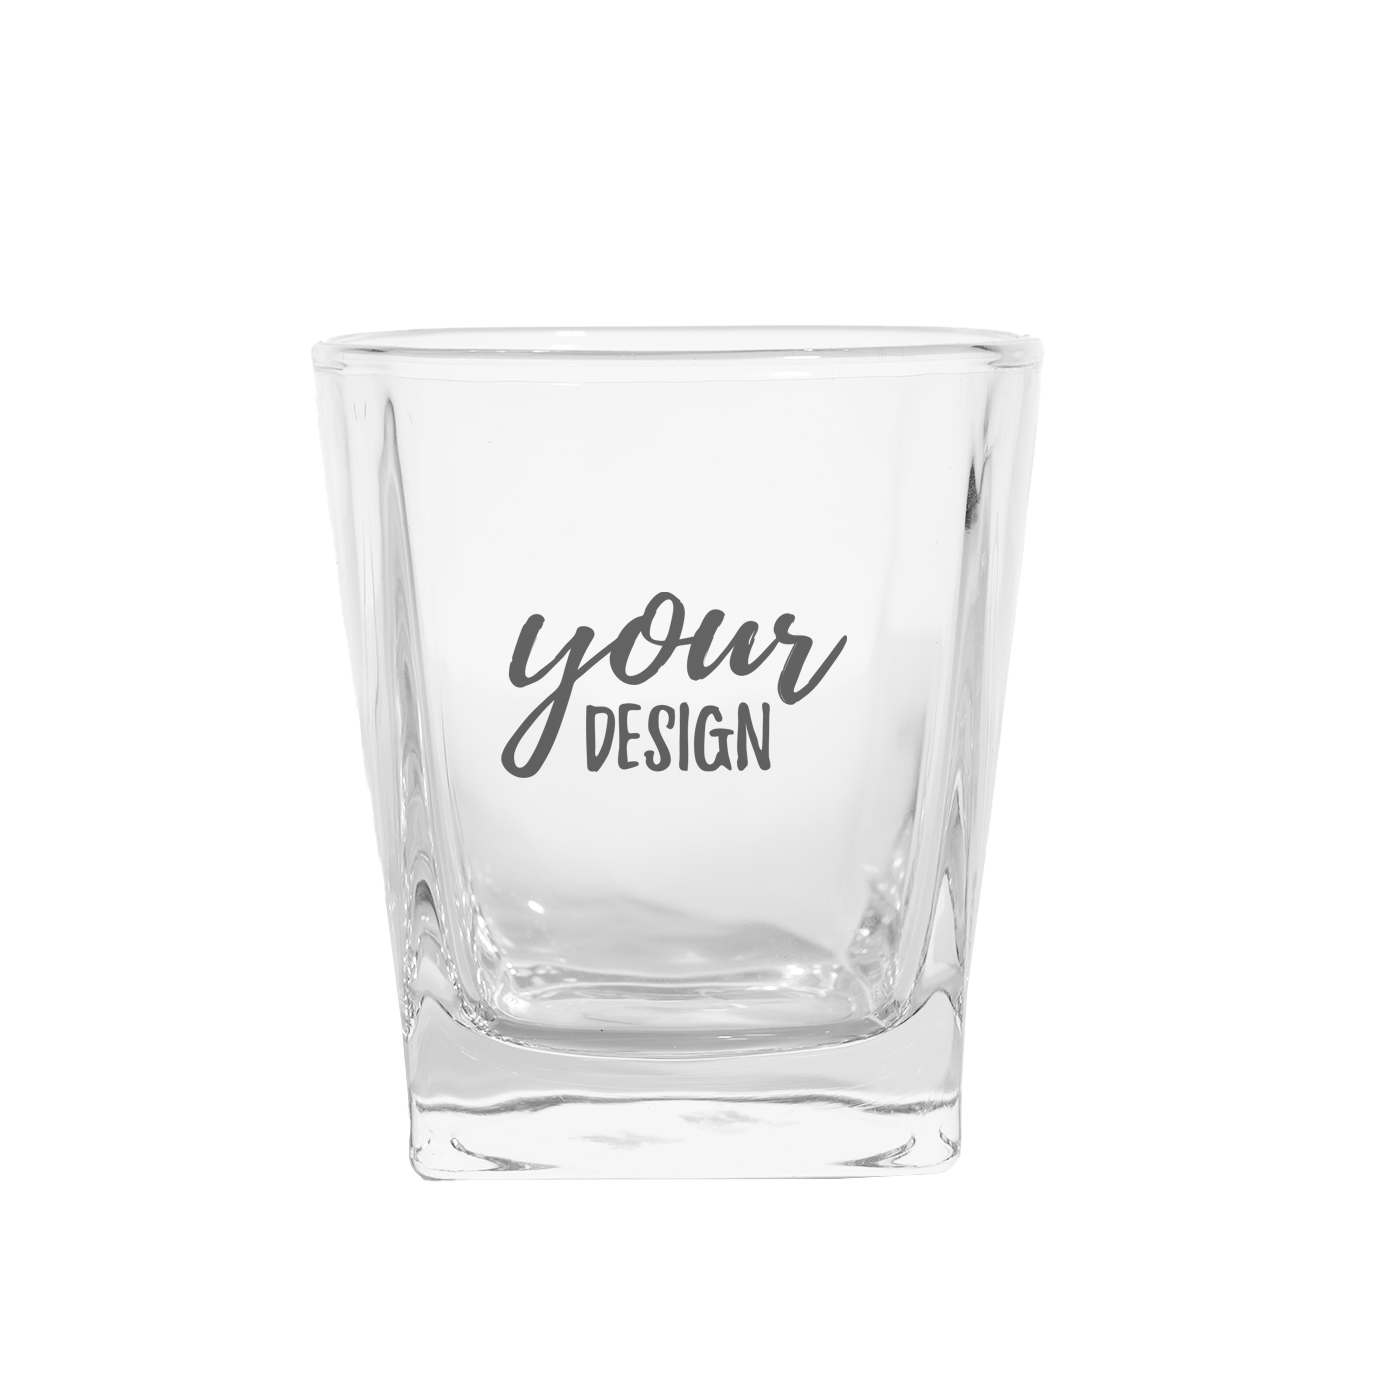 6 oz. Promotional Square Whiskey Glass1